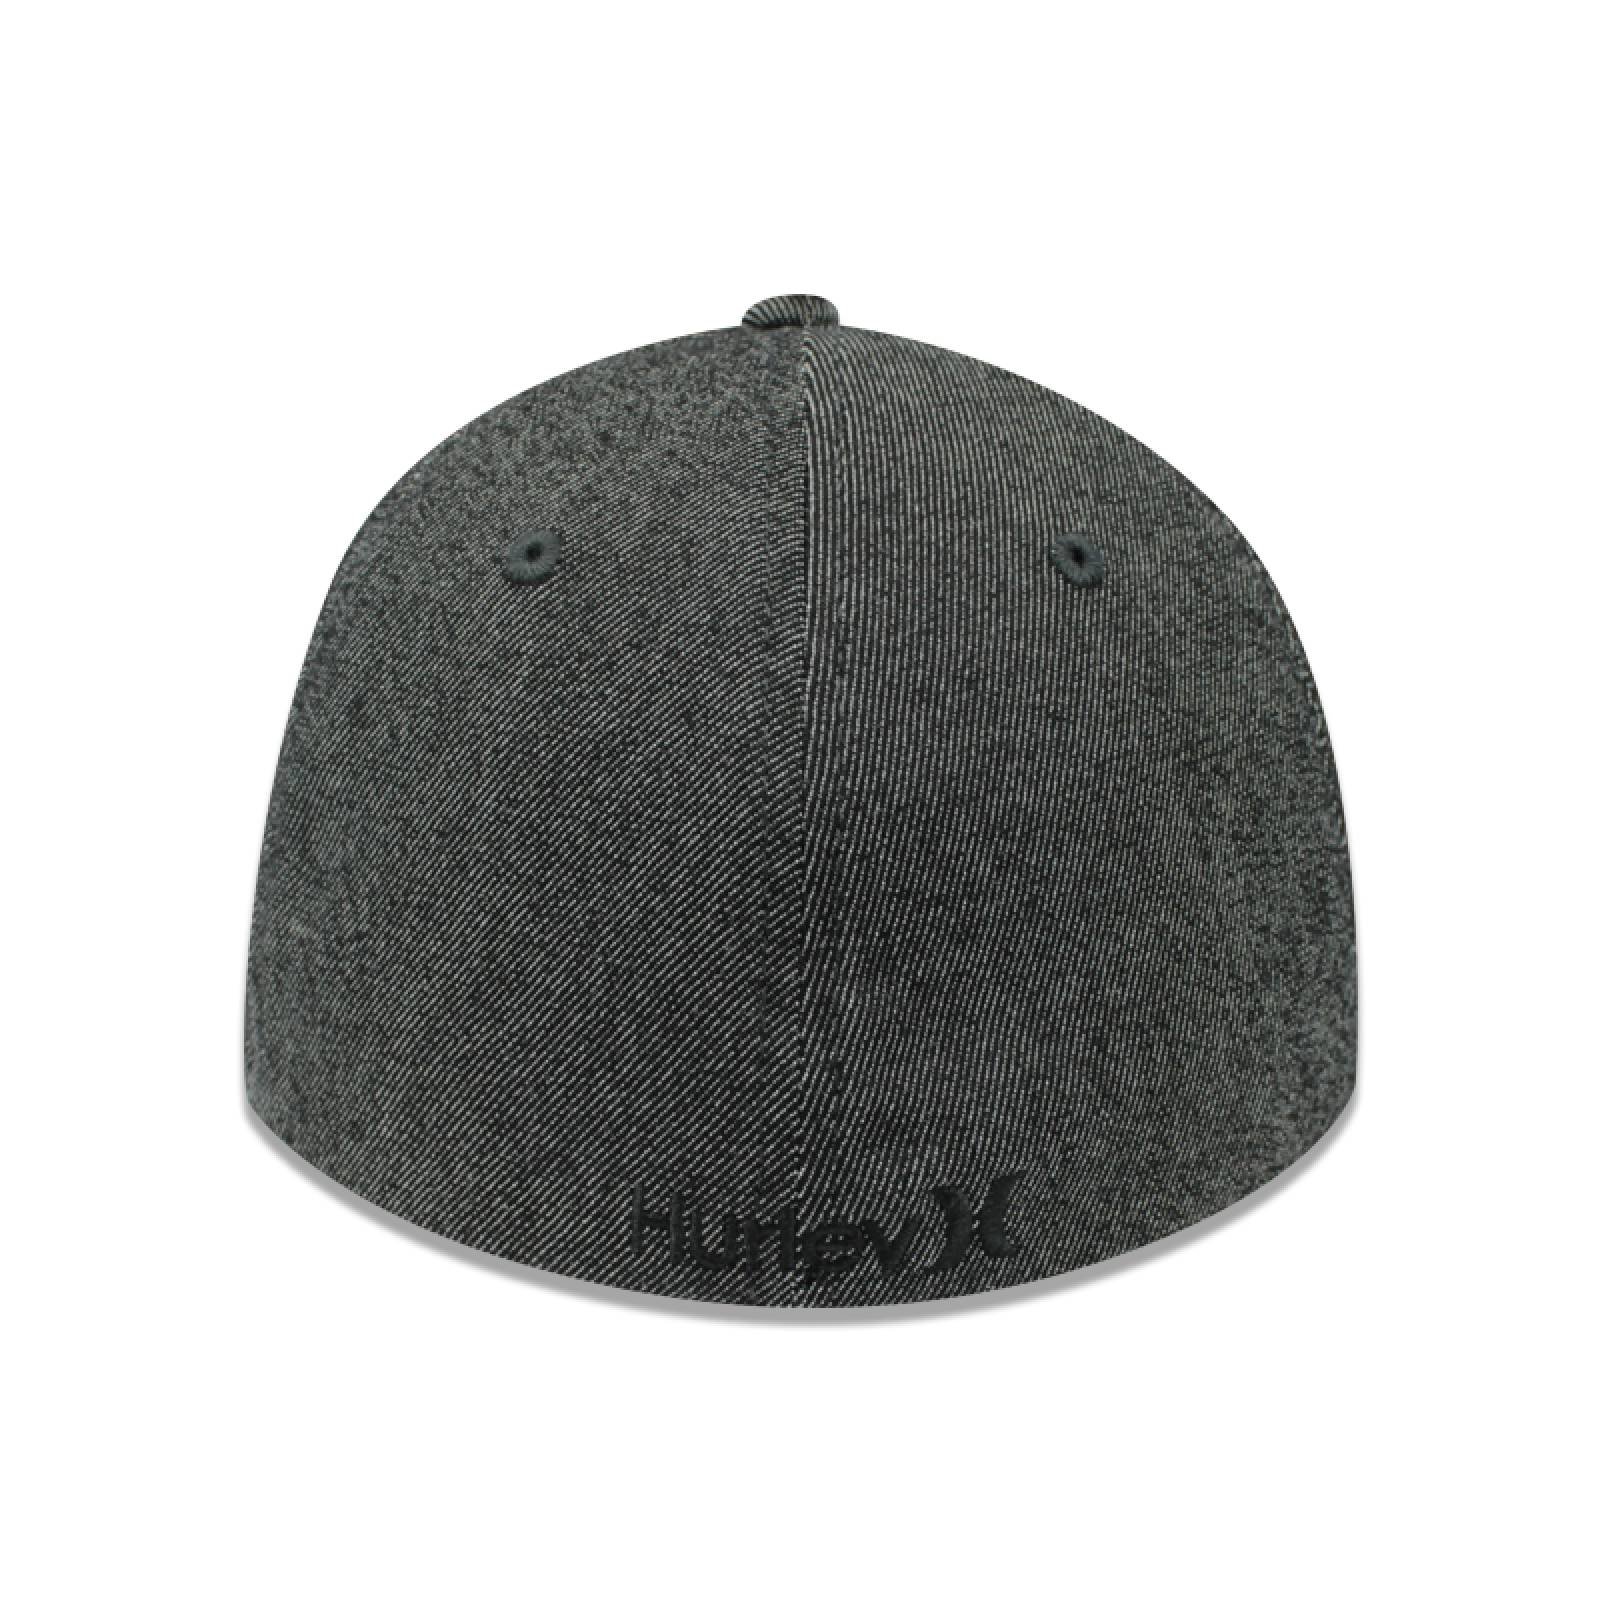 GORRA HURLEY ANTHRACITE BLK SUITS OUTLINE HATS FFIT 